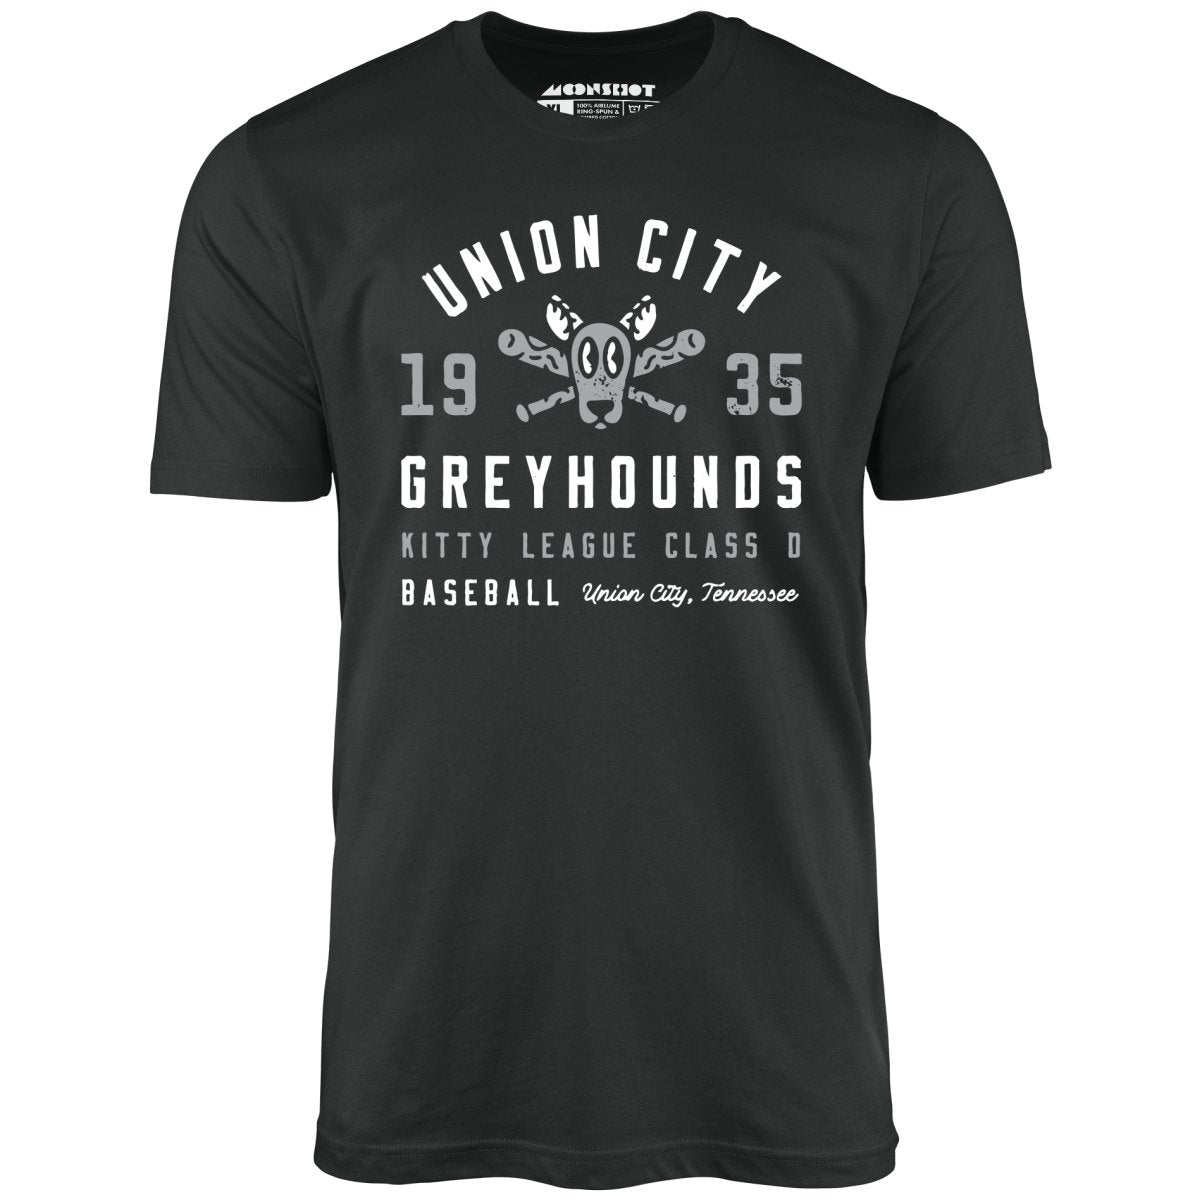 Union City Greyhounds - Tennessee - Vintage Defunct Baseball Teams - Unisex T-Shirt